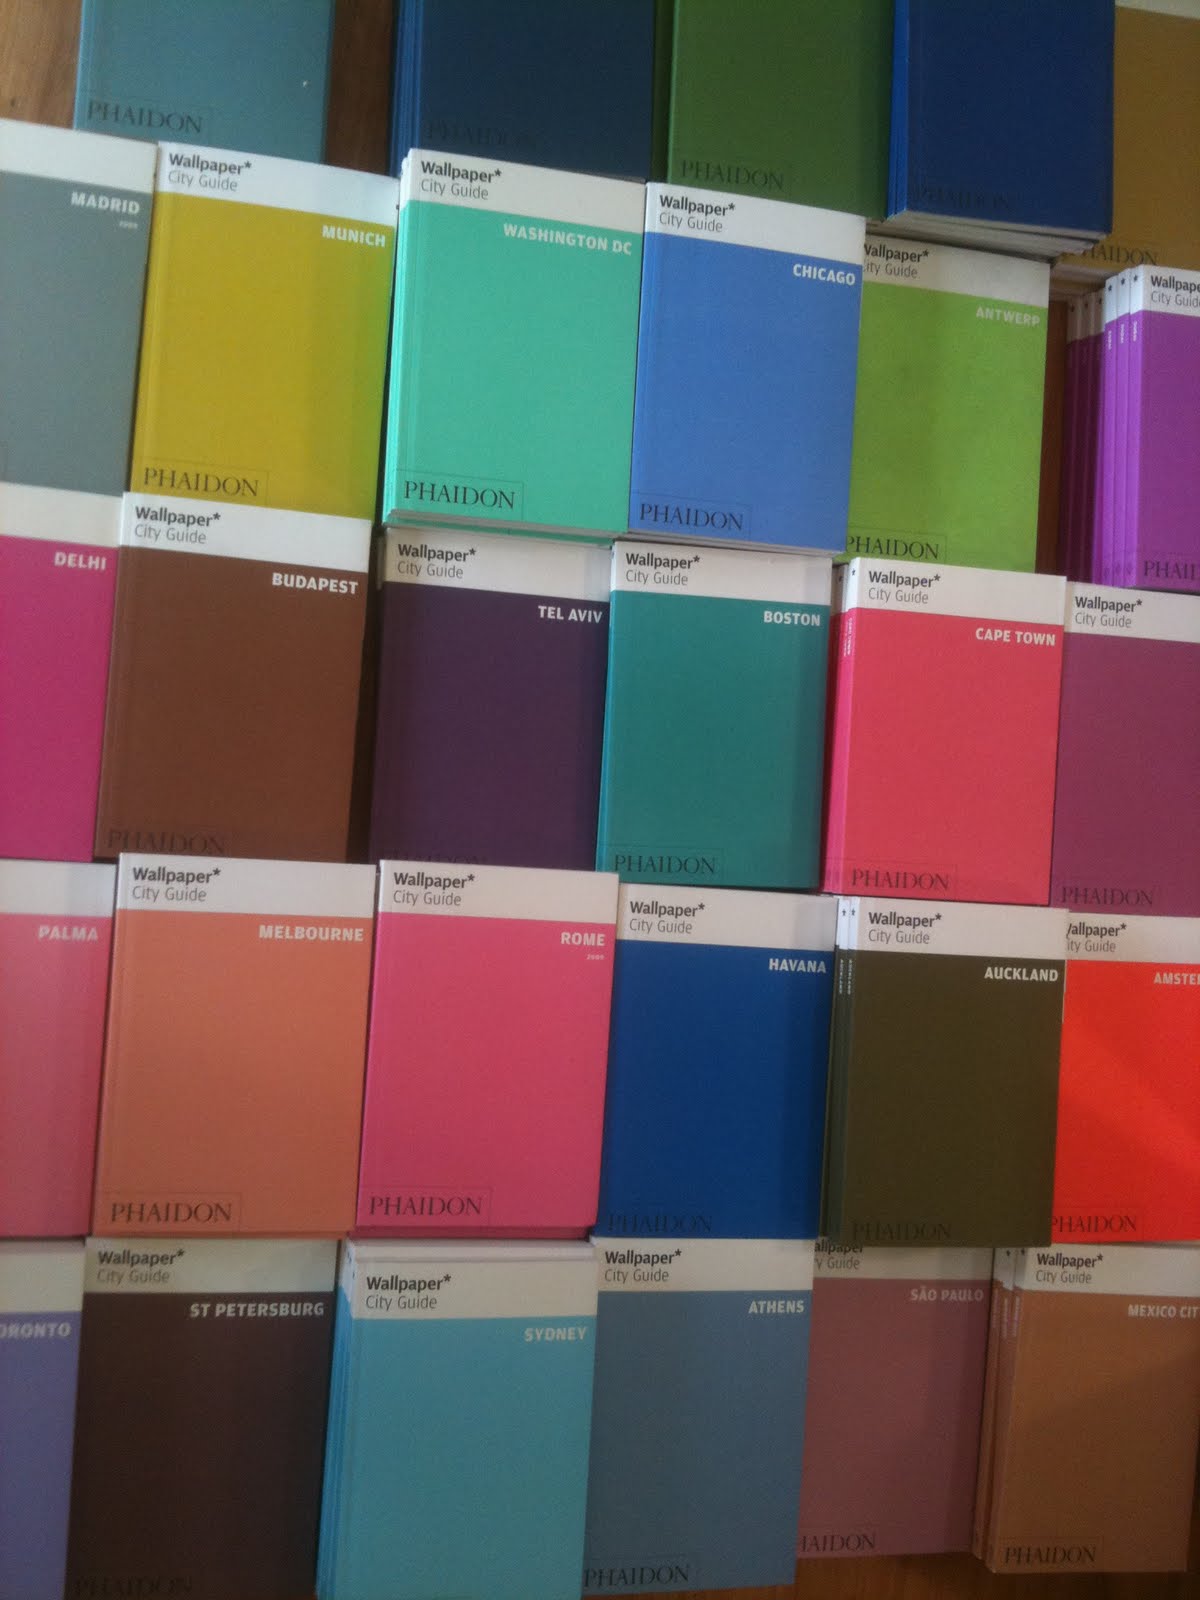 We received a whole new rainbow of Wallpaper Travel guides yesterday, 